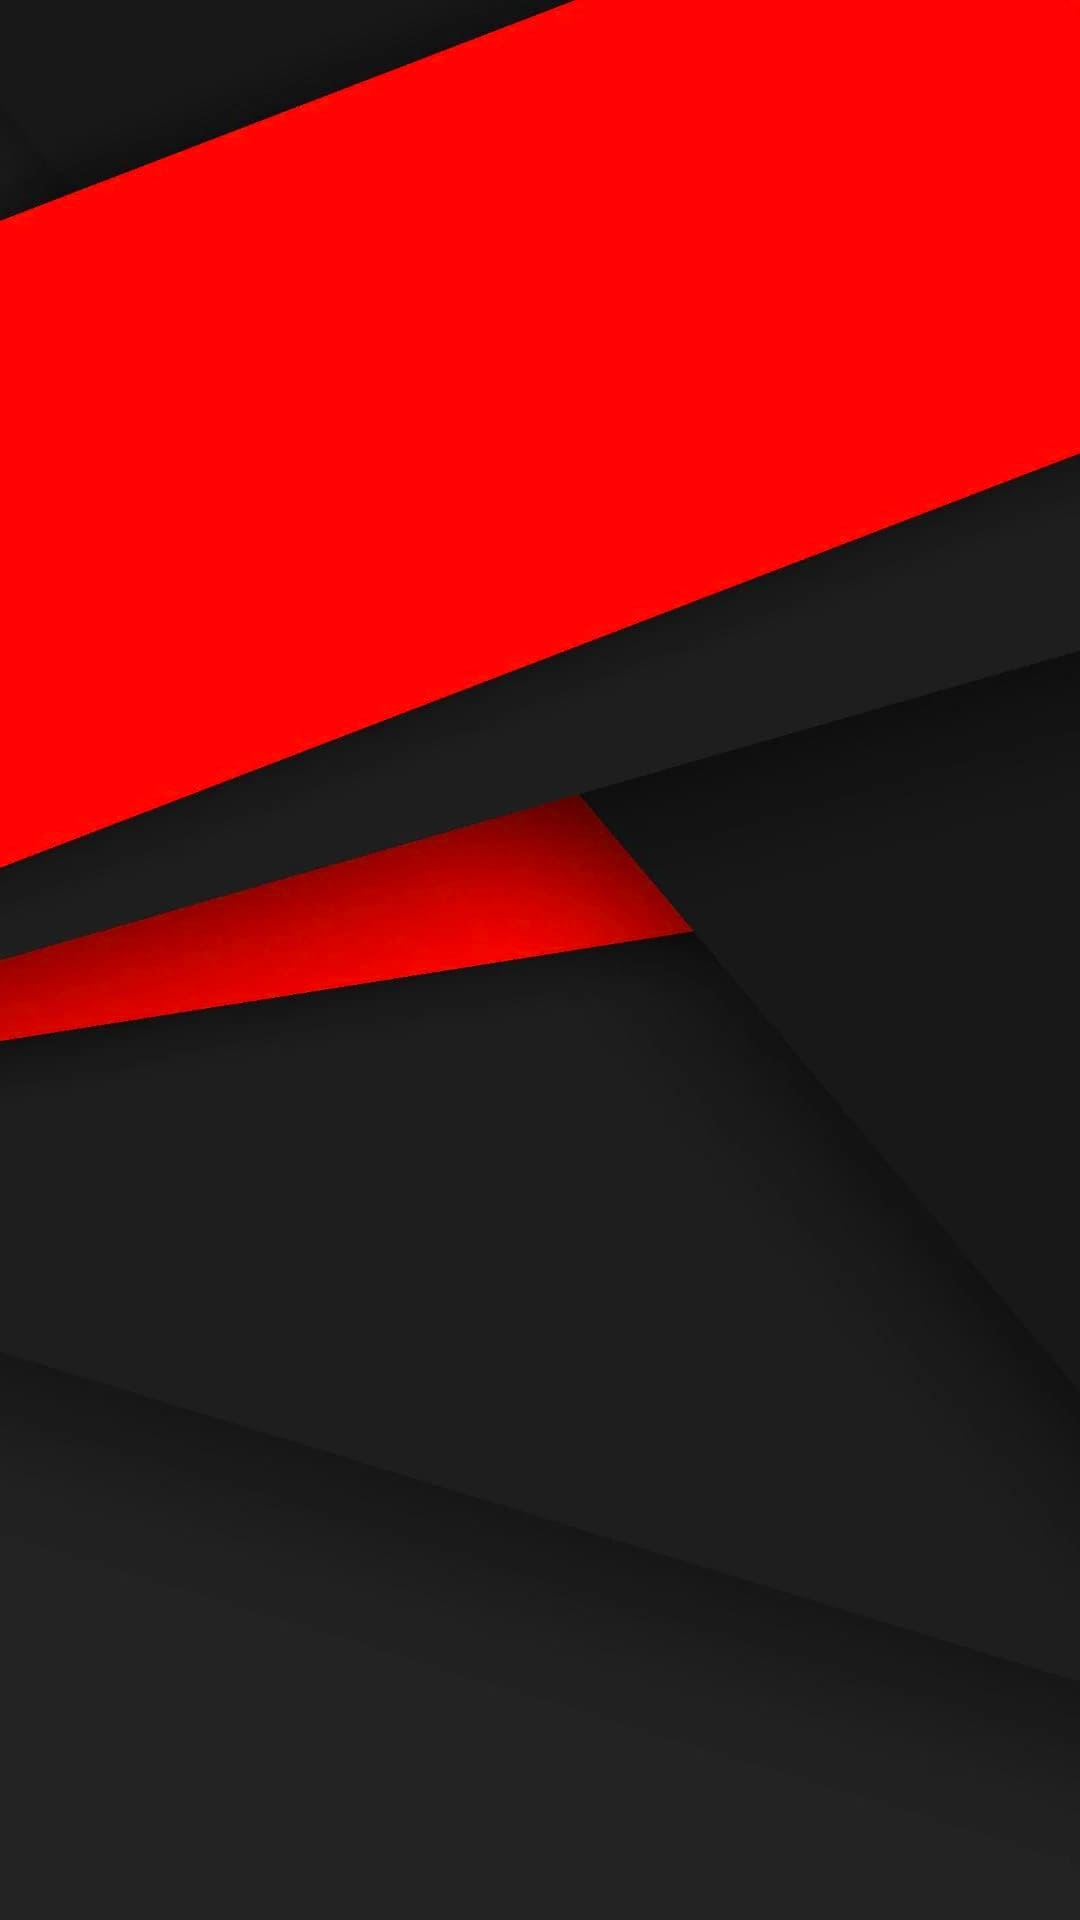 Red And Black Wallpaper - iXpap